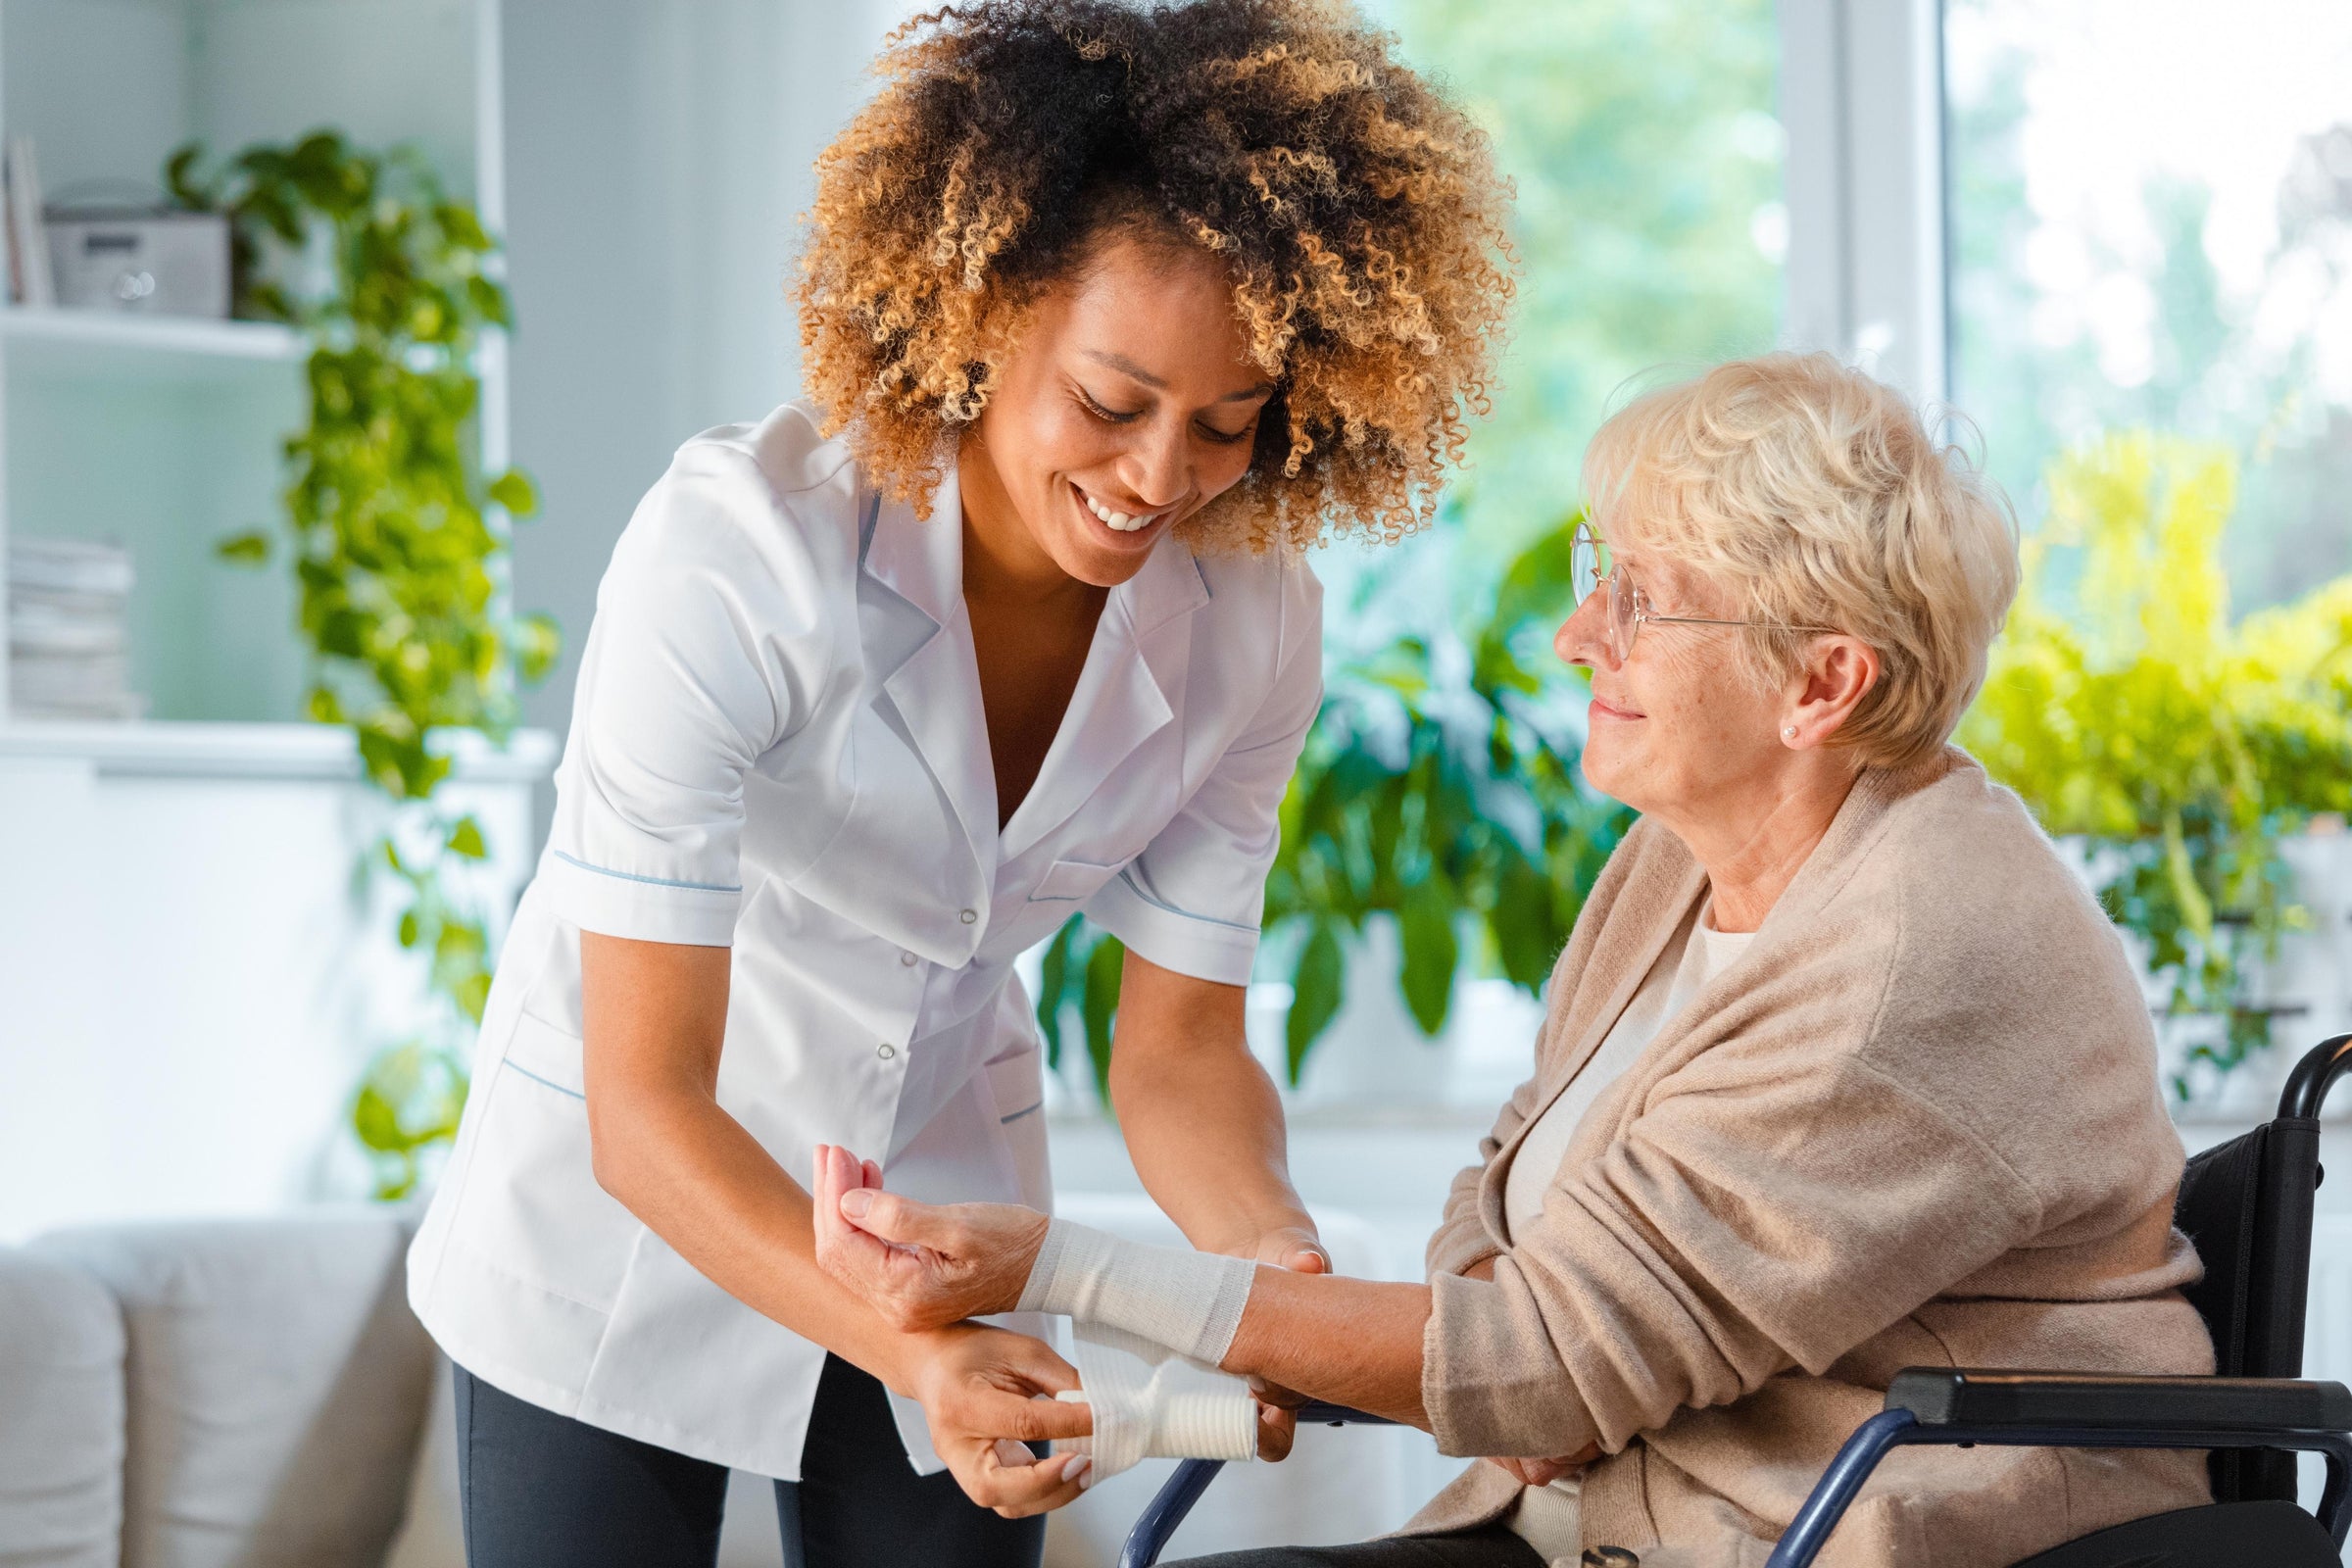 Nurse educating an elderly woman about: “Do wounds heal faster covered or uncovered?” while bandaging the patient’s arm with medical gauze